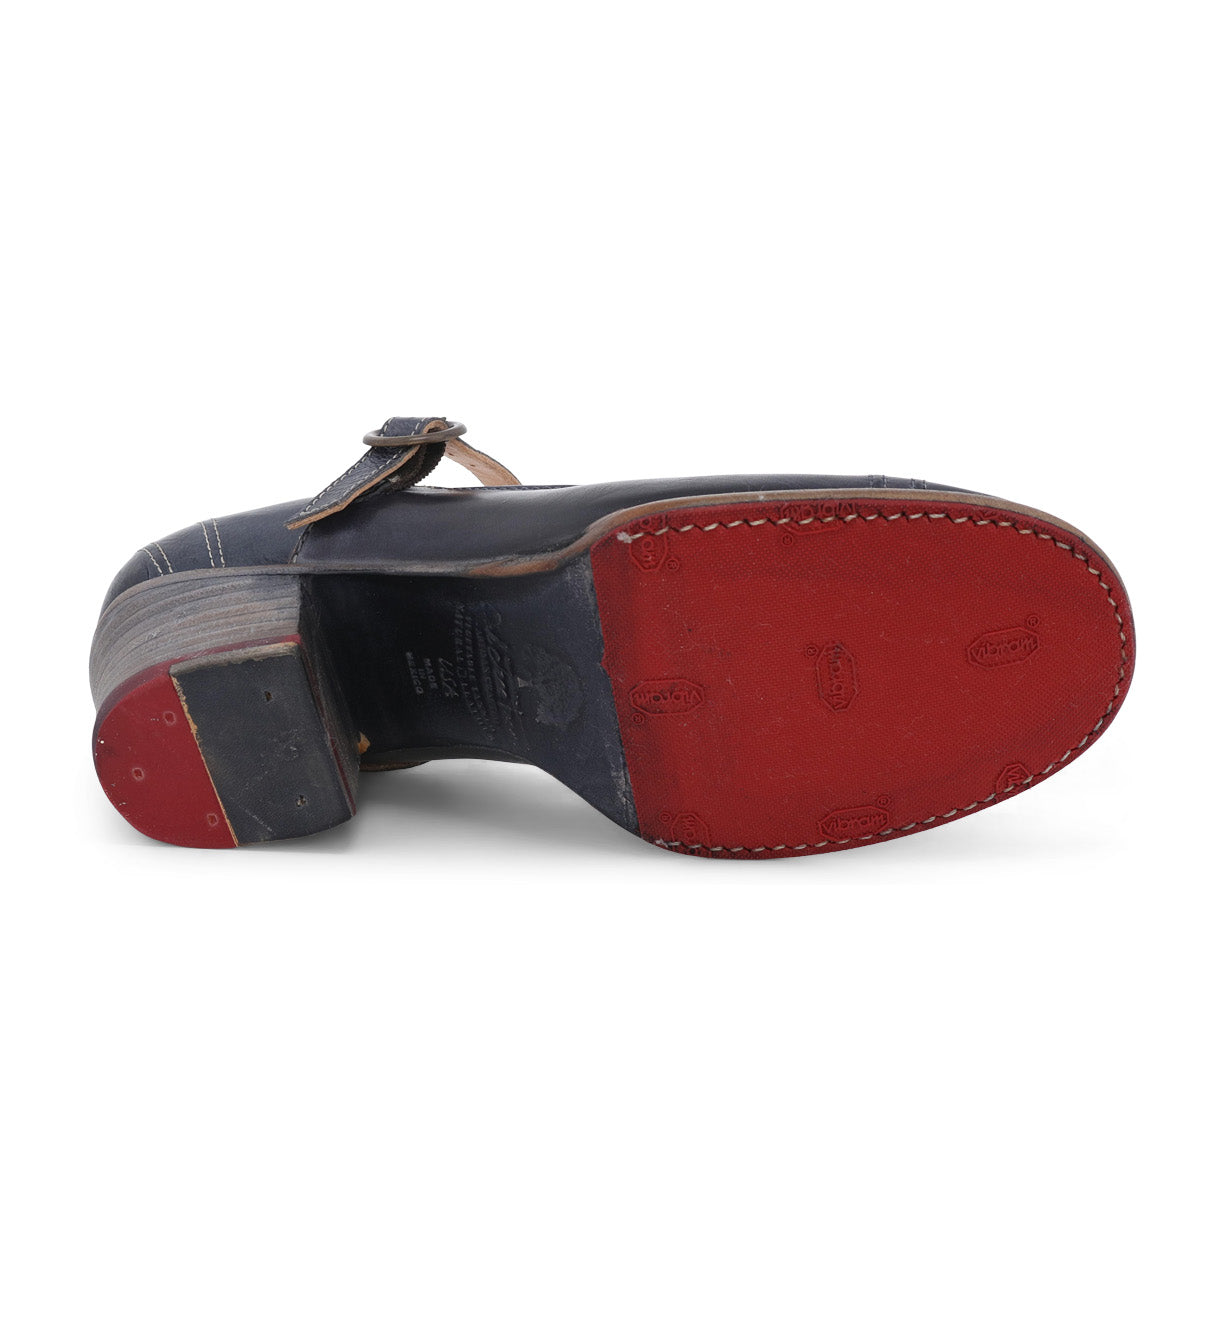 A pair of Twigley Mary Jane style shoes with red and blue soles, made of leather by Oak Tree Farms.